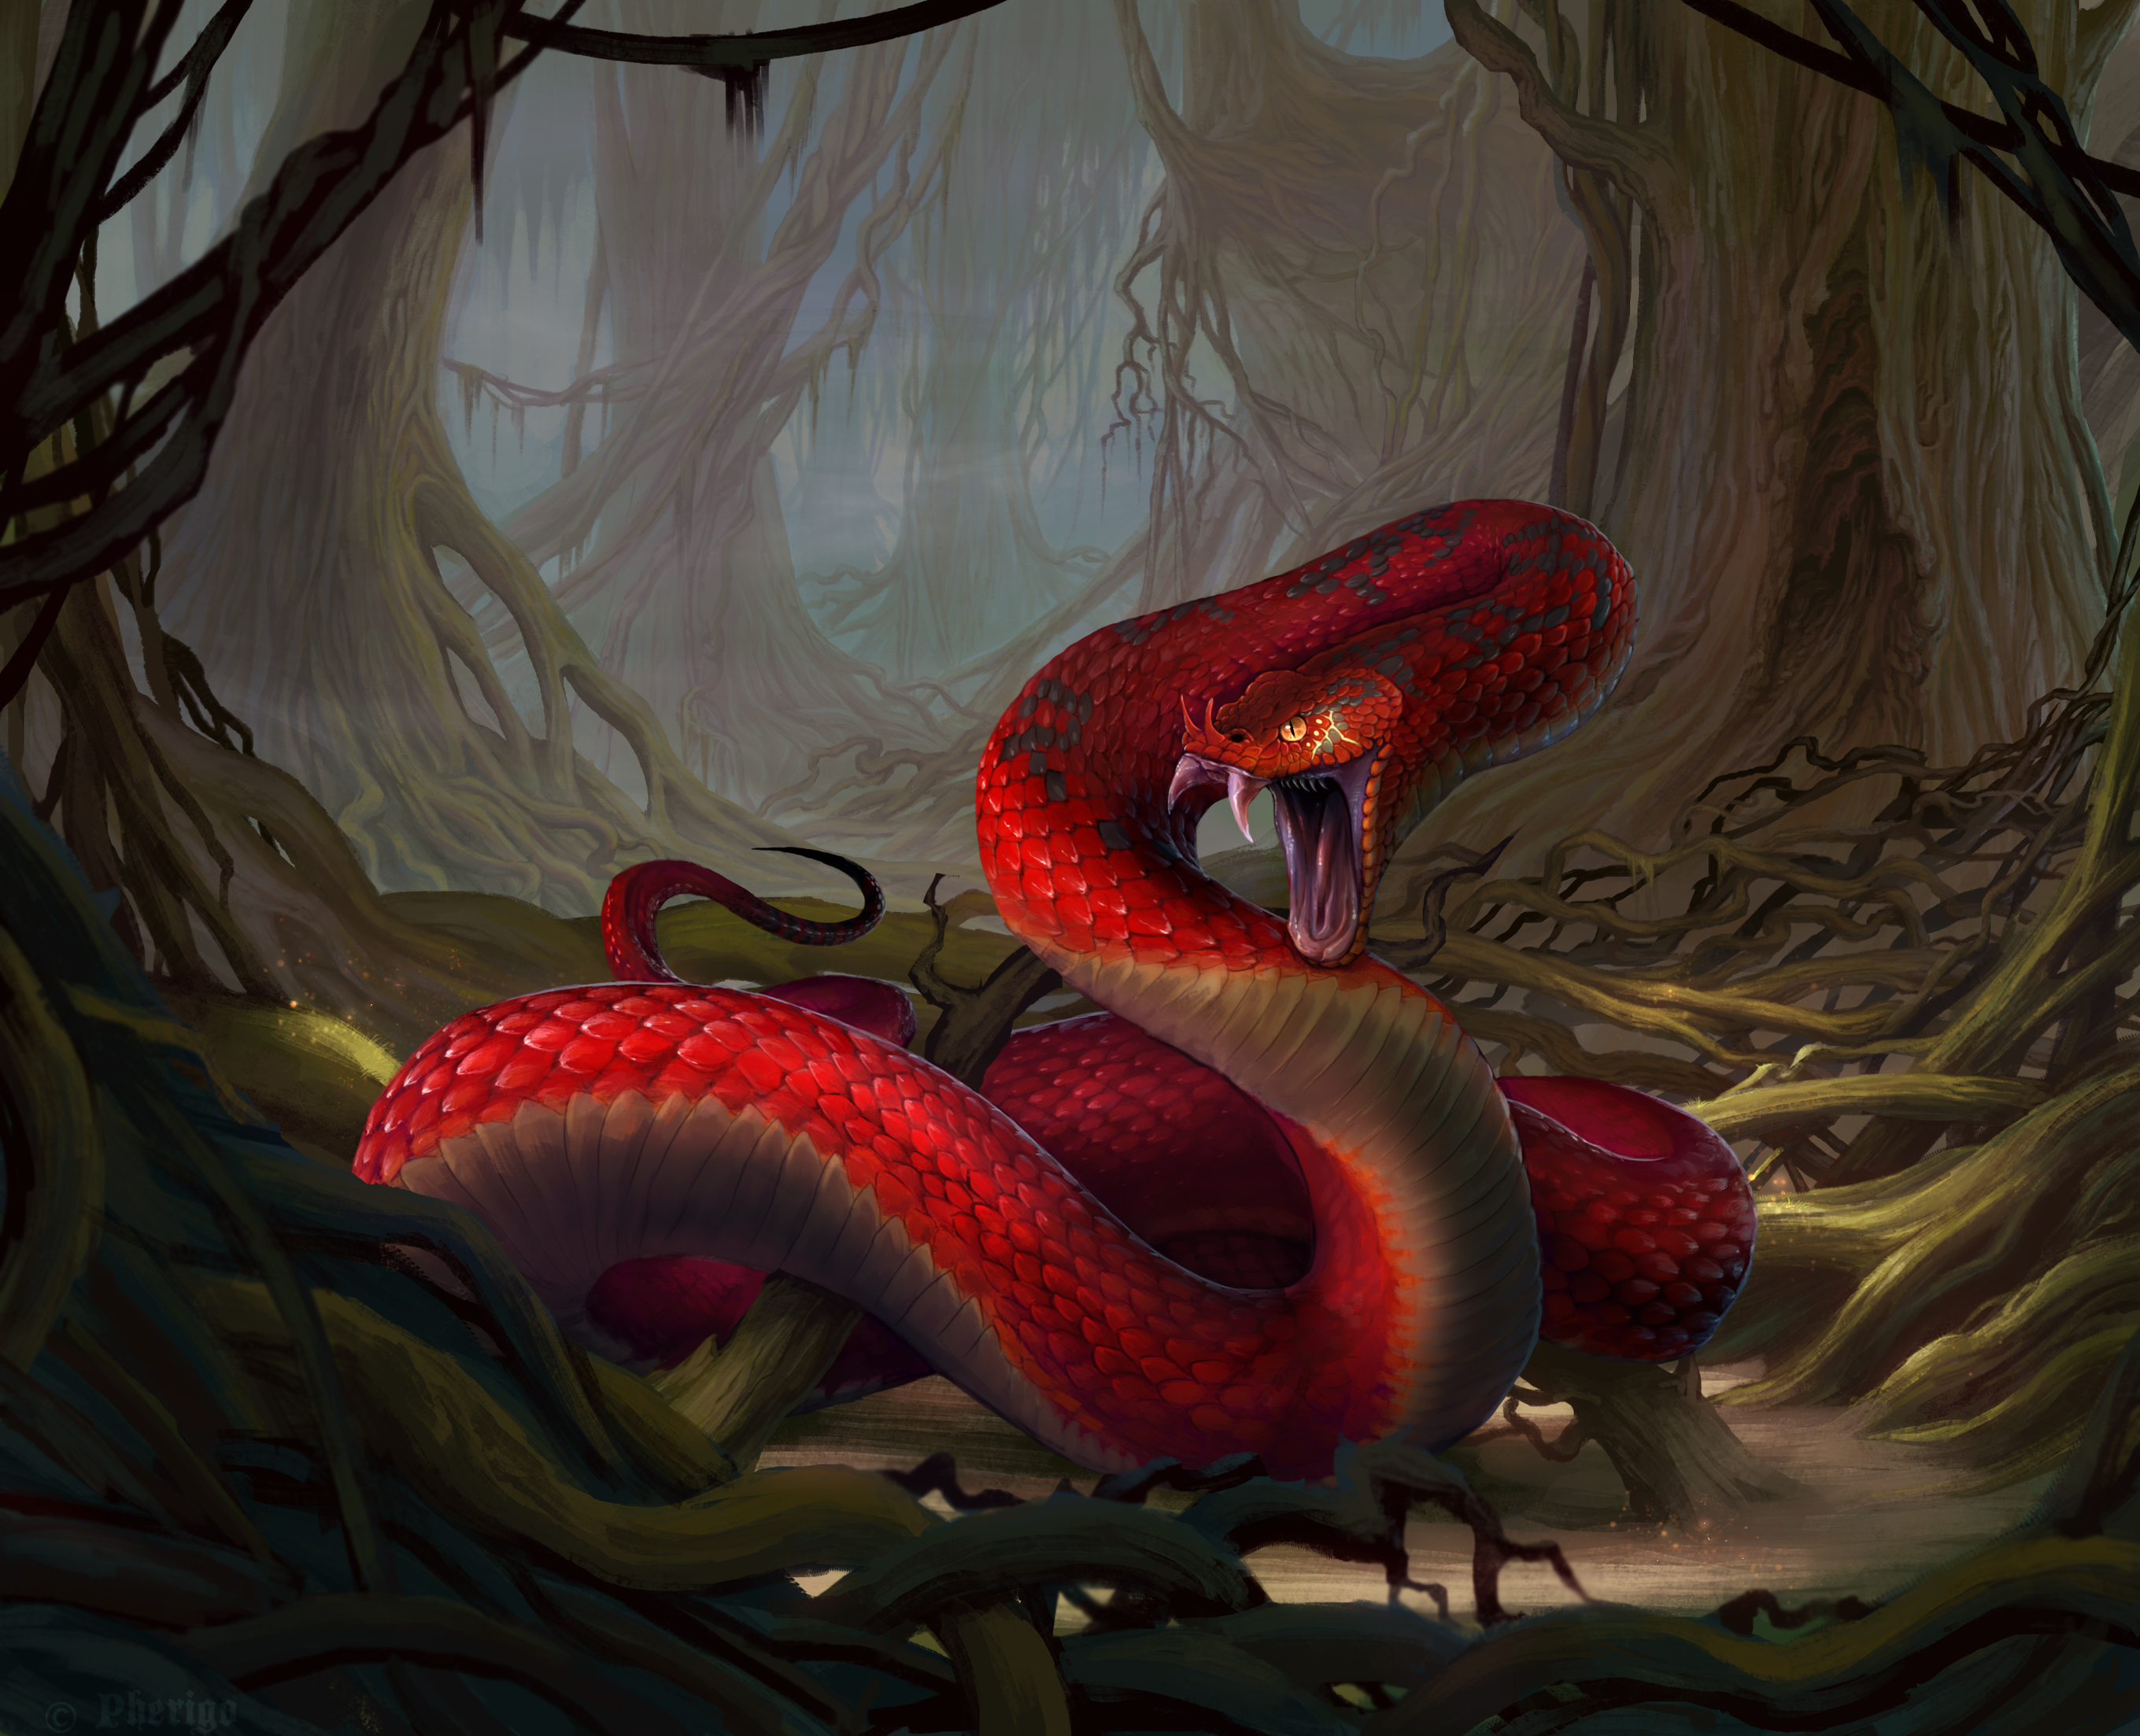 Red snake baring its fangs by Pherigo